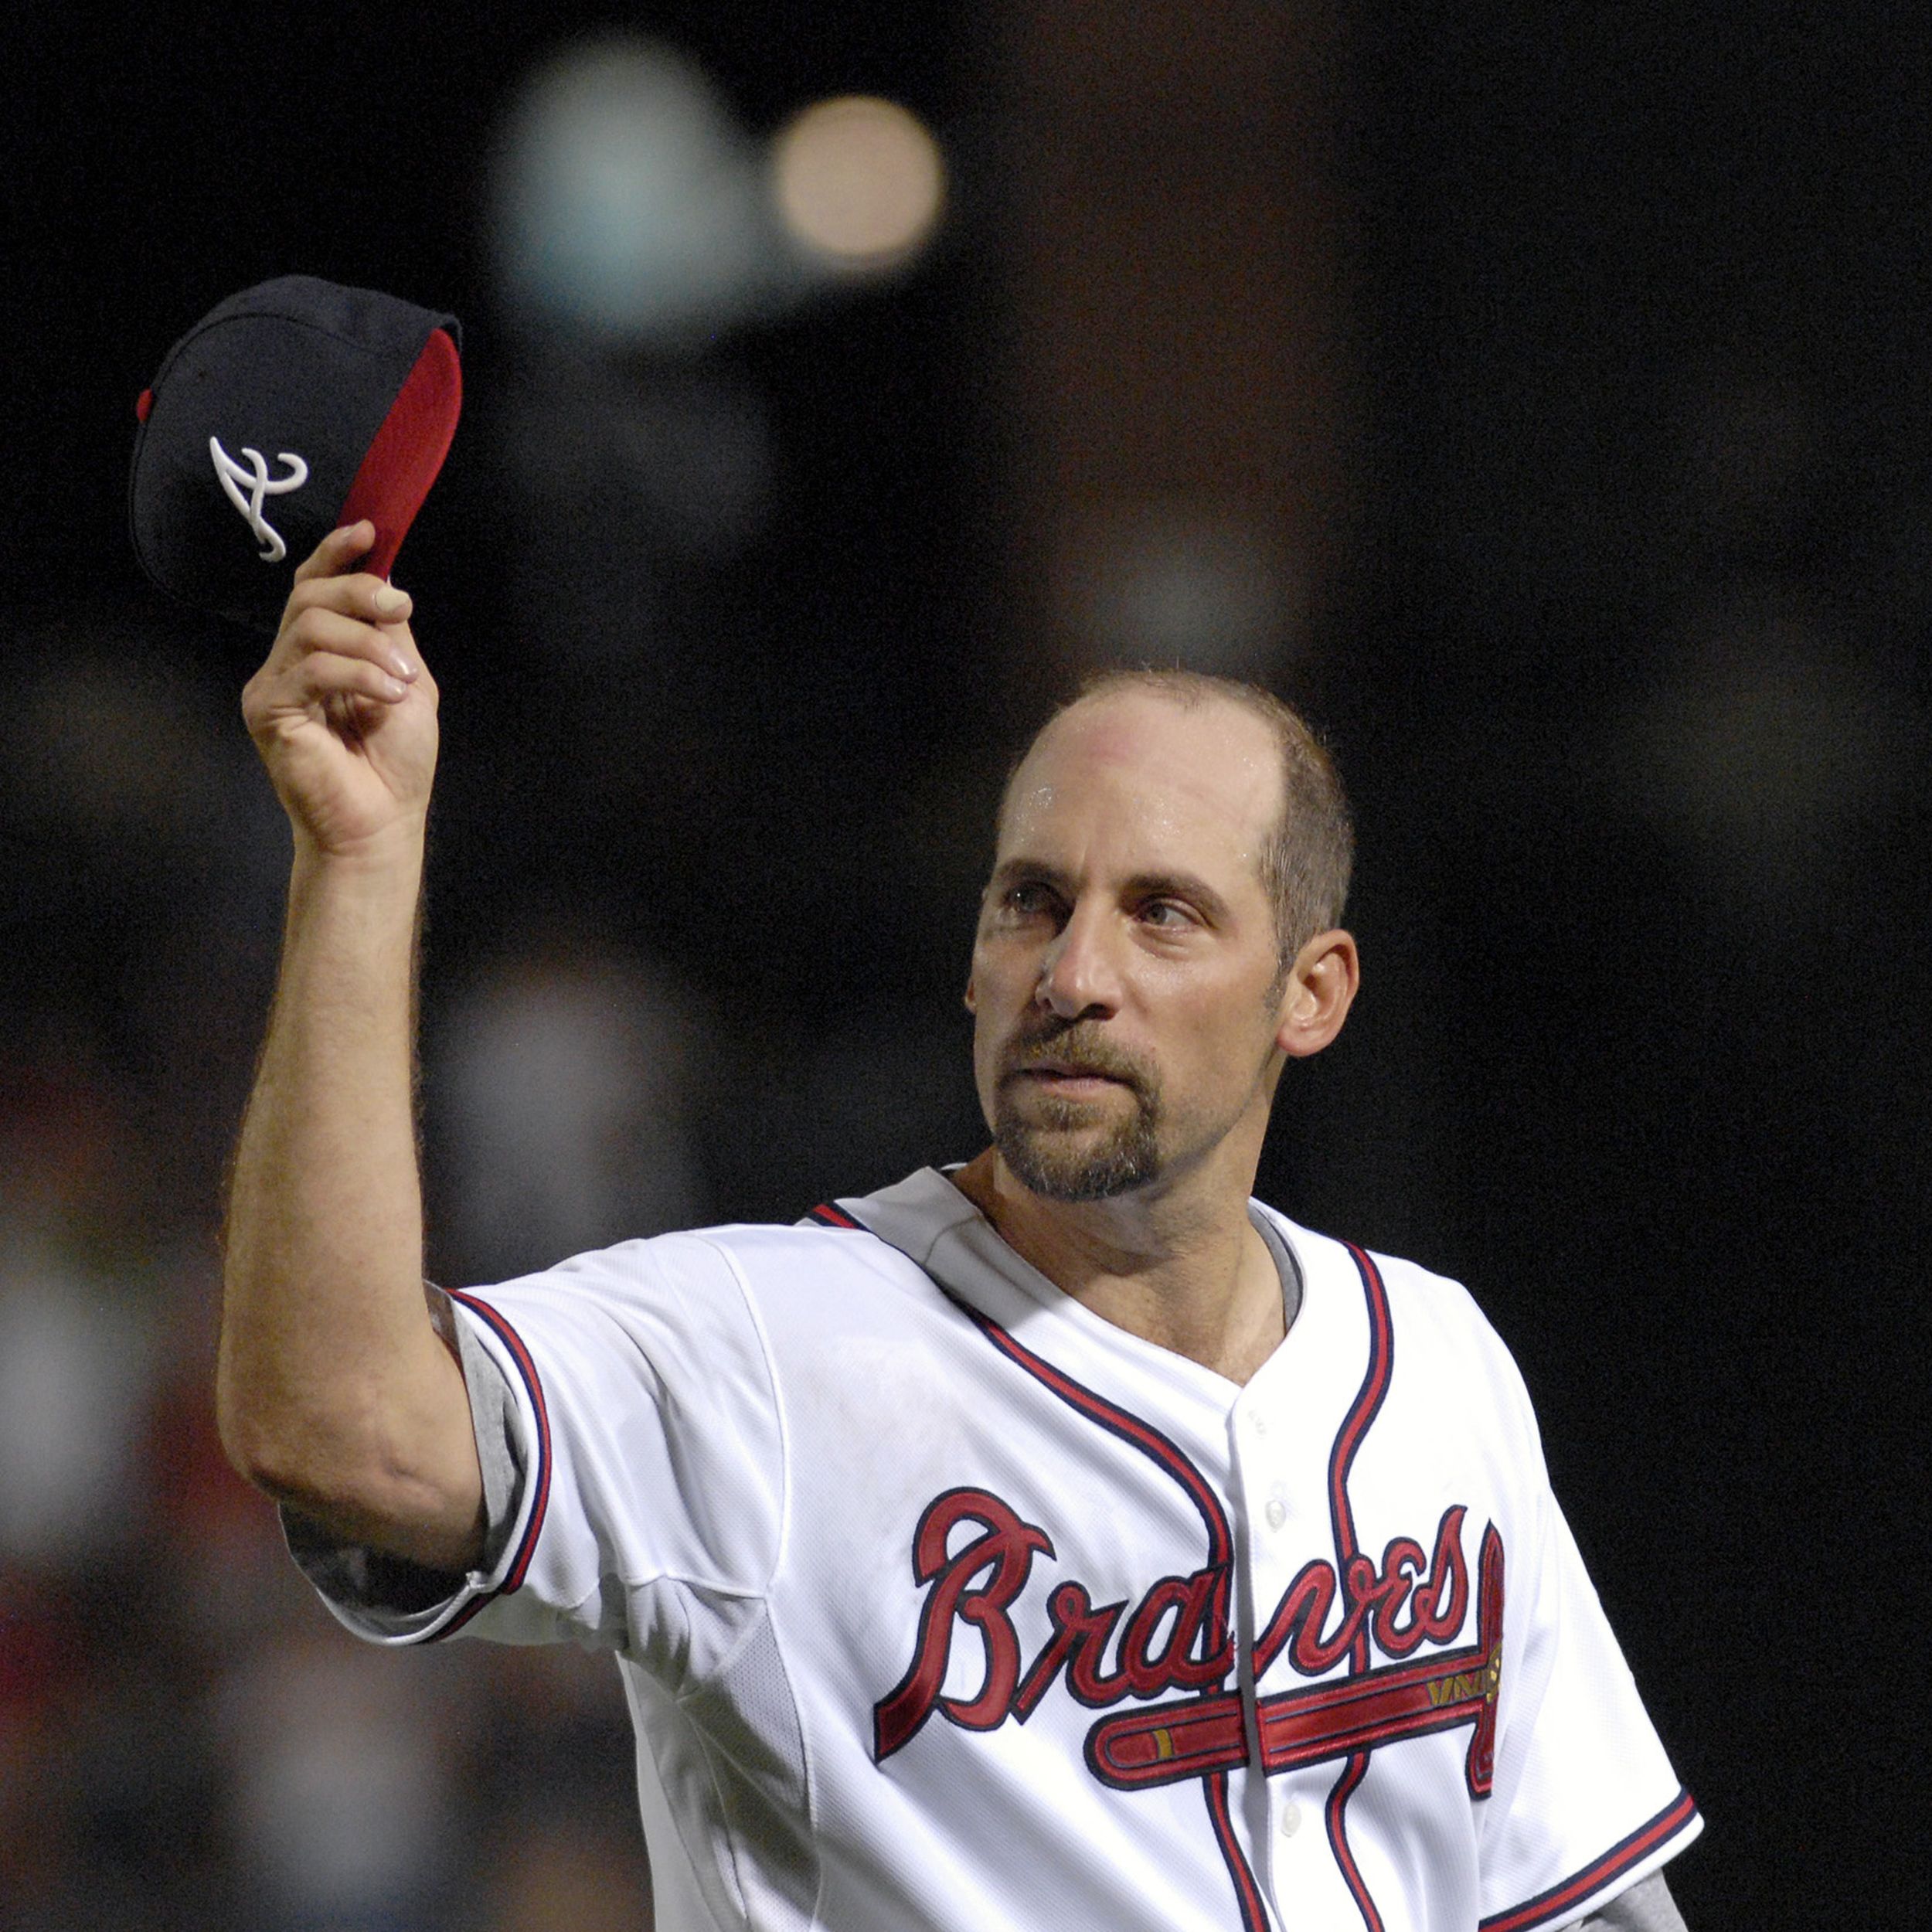 August 23, 2009: John Smoltz earns 213th and final career win in debut with  Cardinals – Society for American Baseball Research